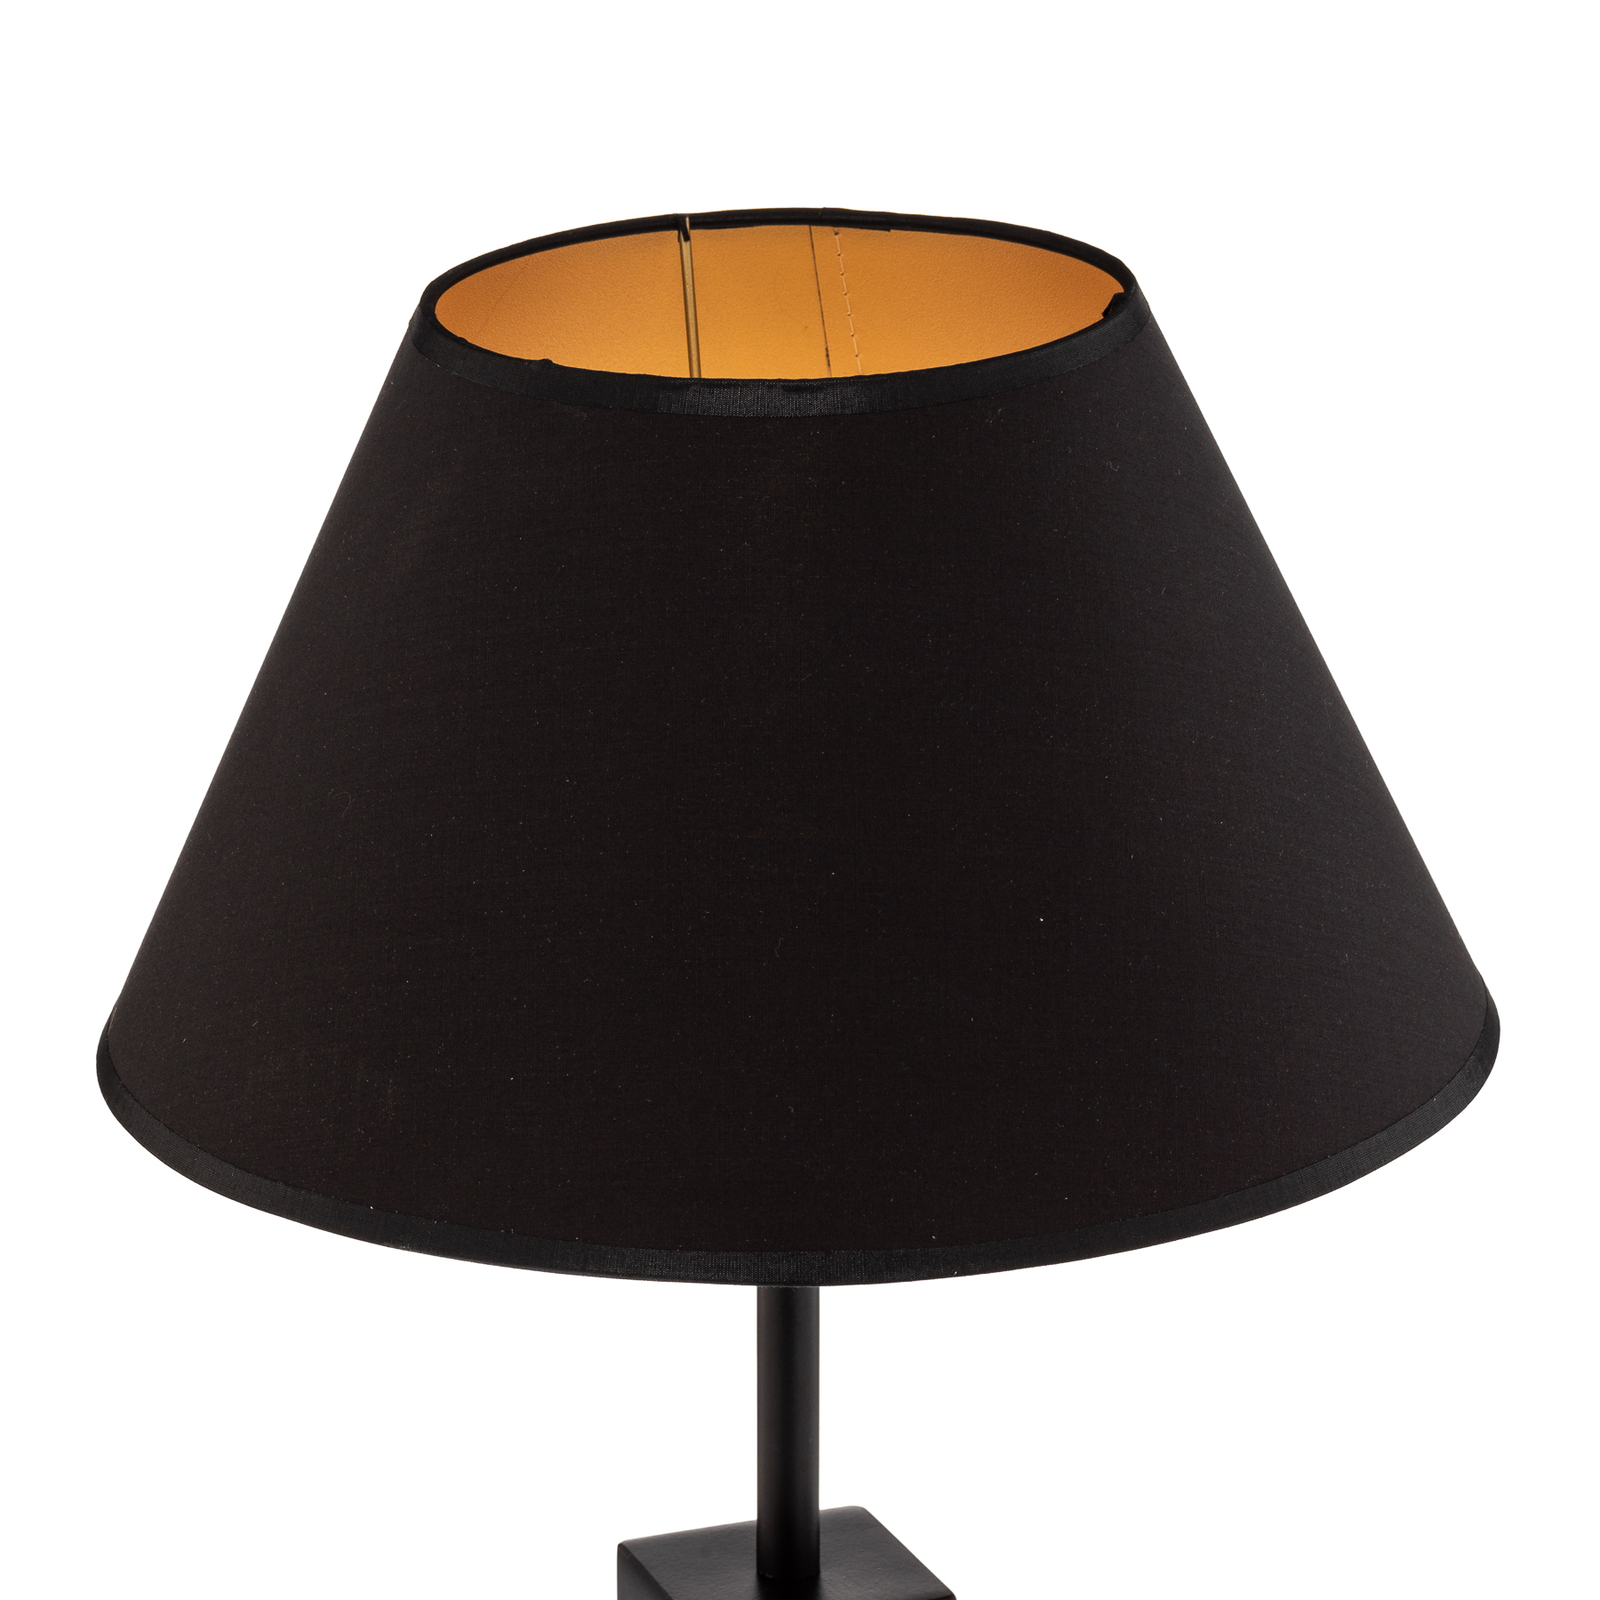 Stila table lamp, conical lampshade black-gold